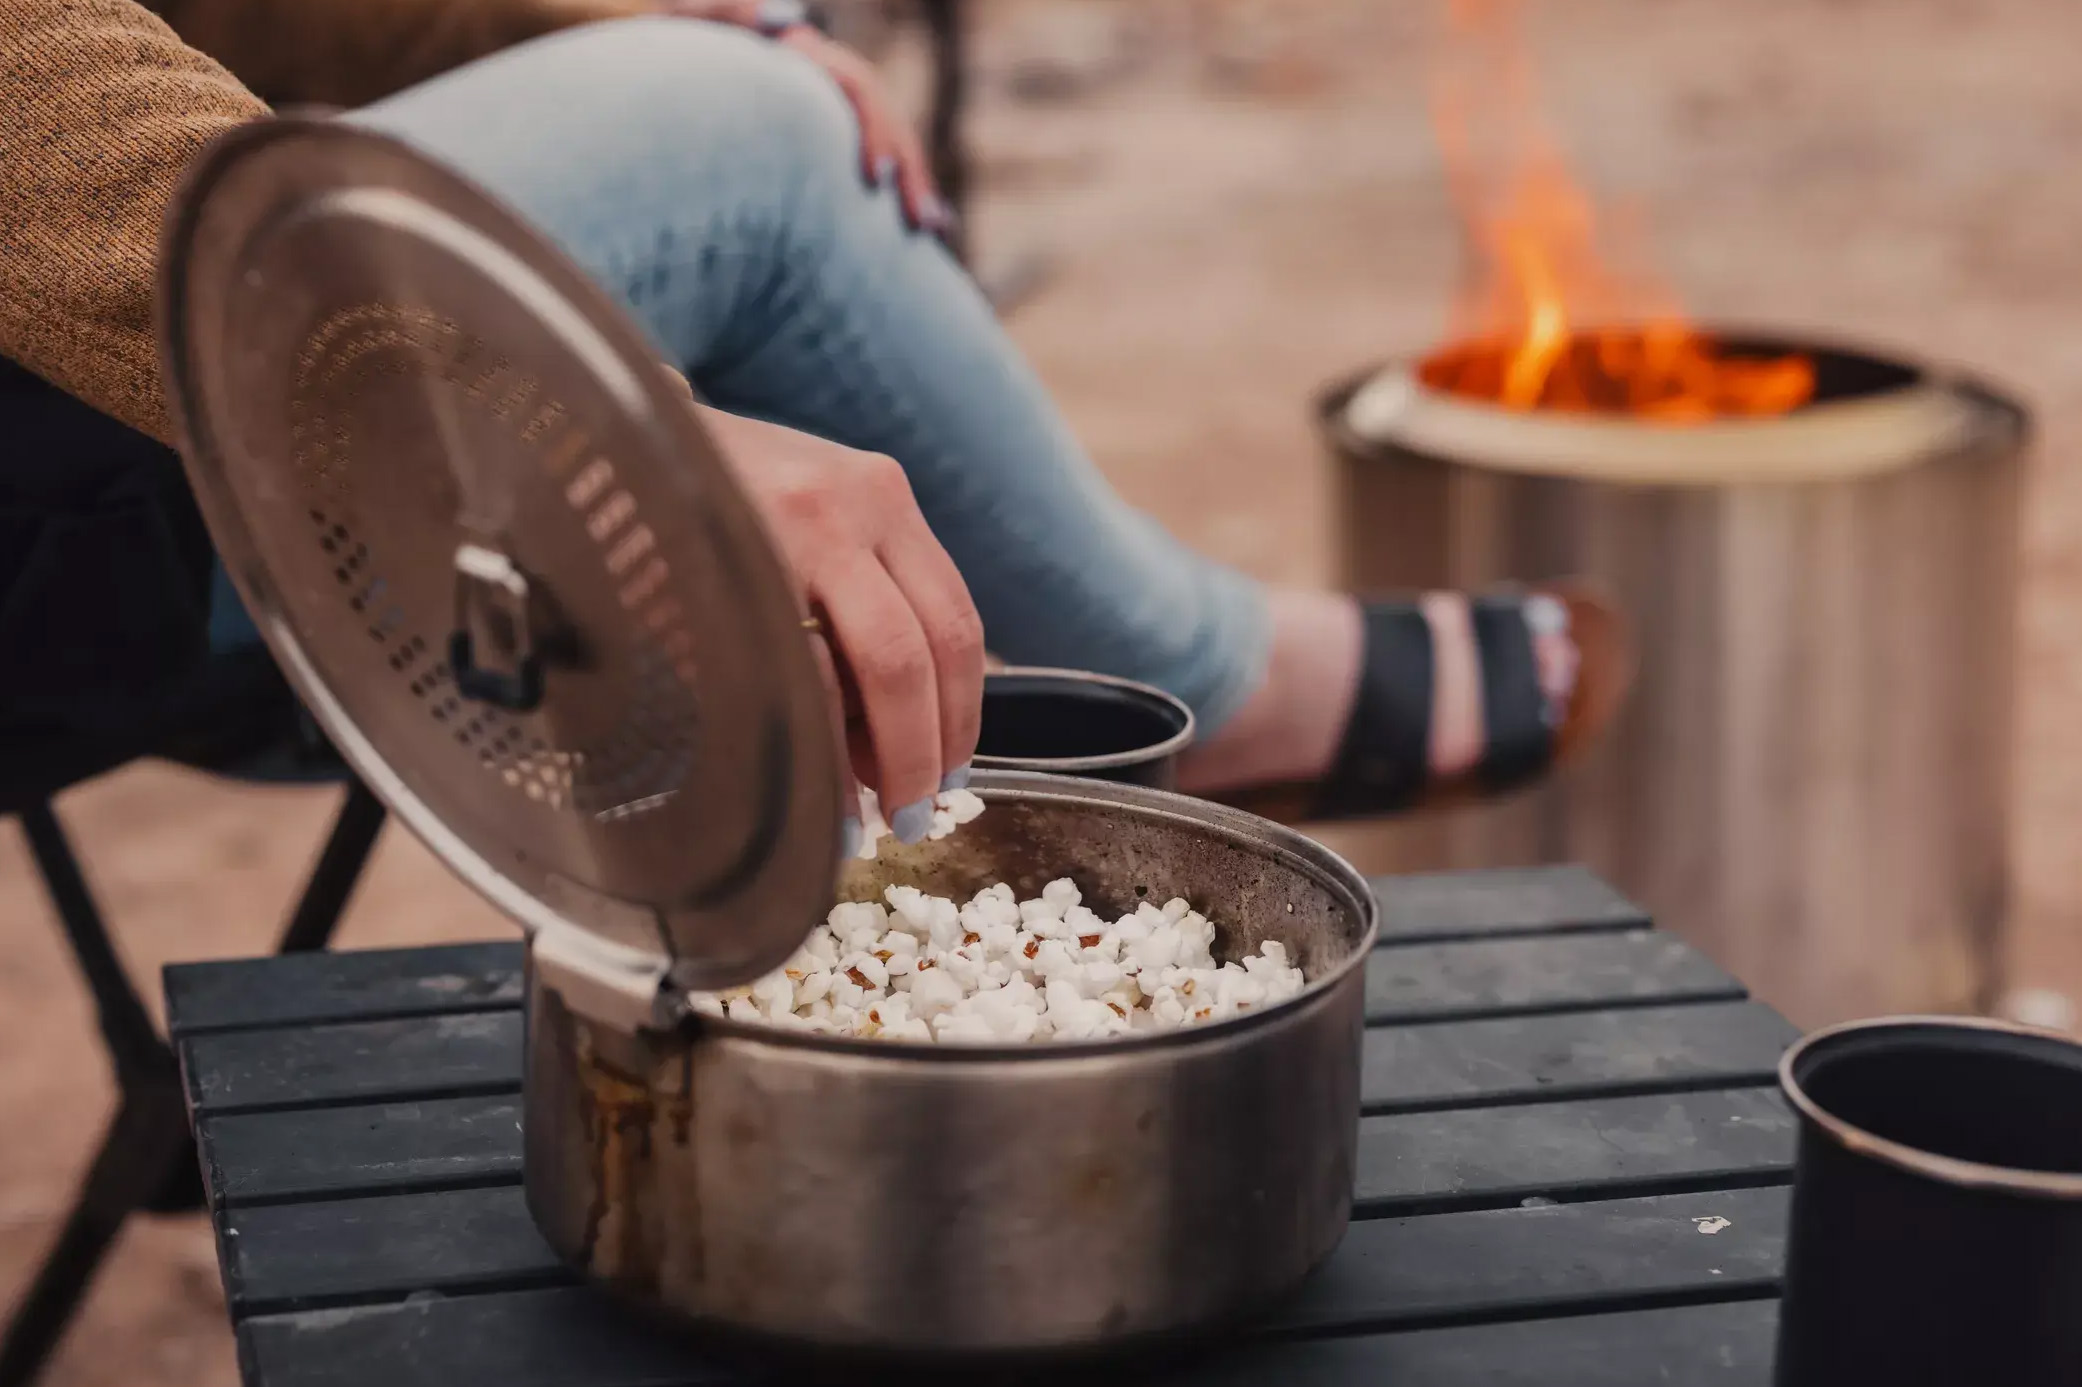 Solo Stove Popcorn Maker, National Park Carhartts, CBD Chamois Cream, and More Emerging Gear